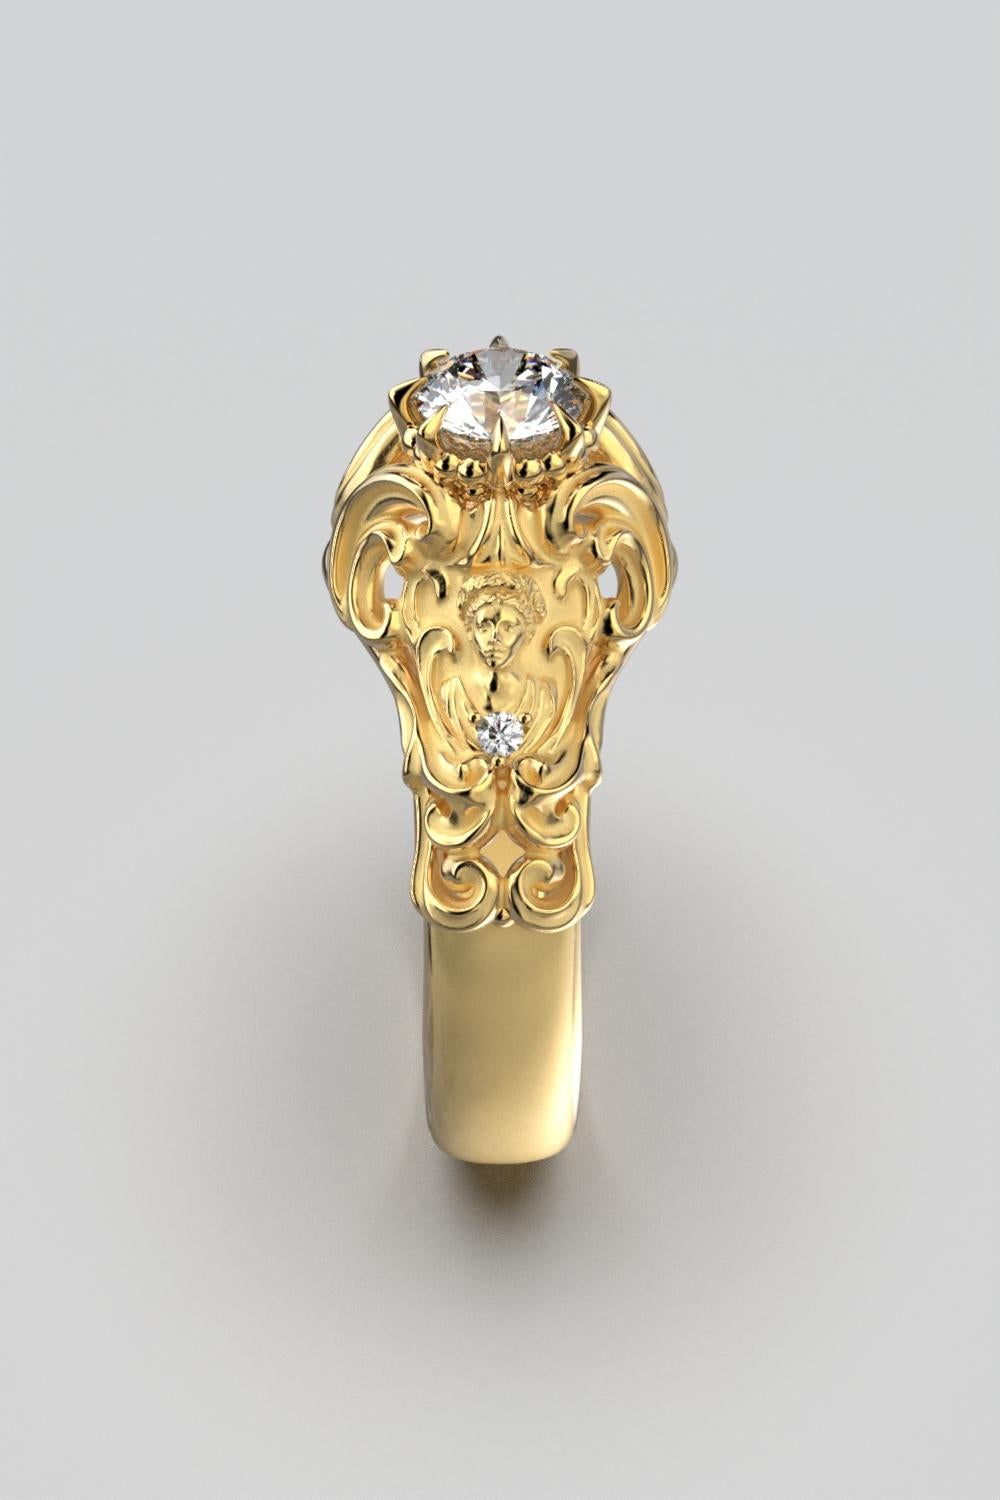 For Sale:  14k Gold Diamond Ring by Oltremare Gioielli in Italian Renaissance Style 2